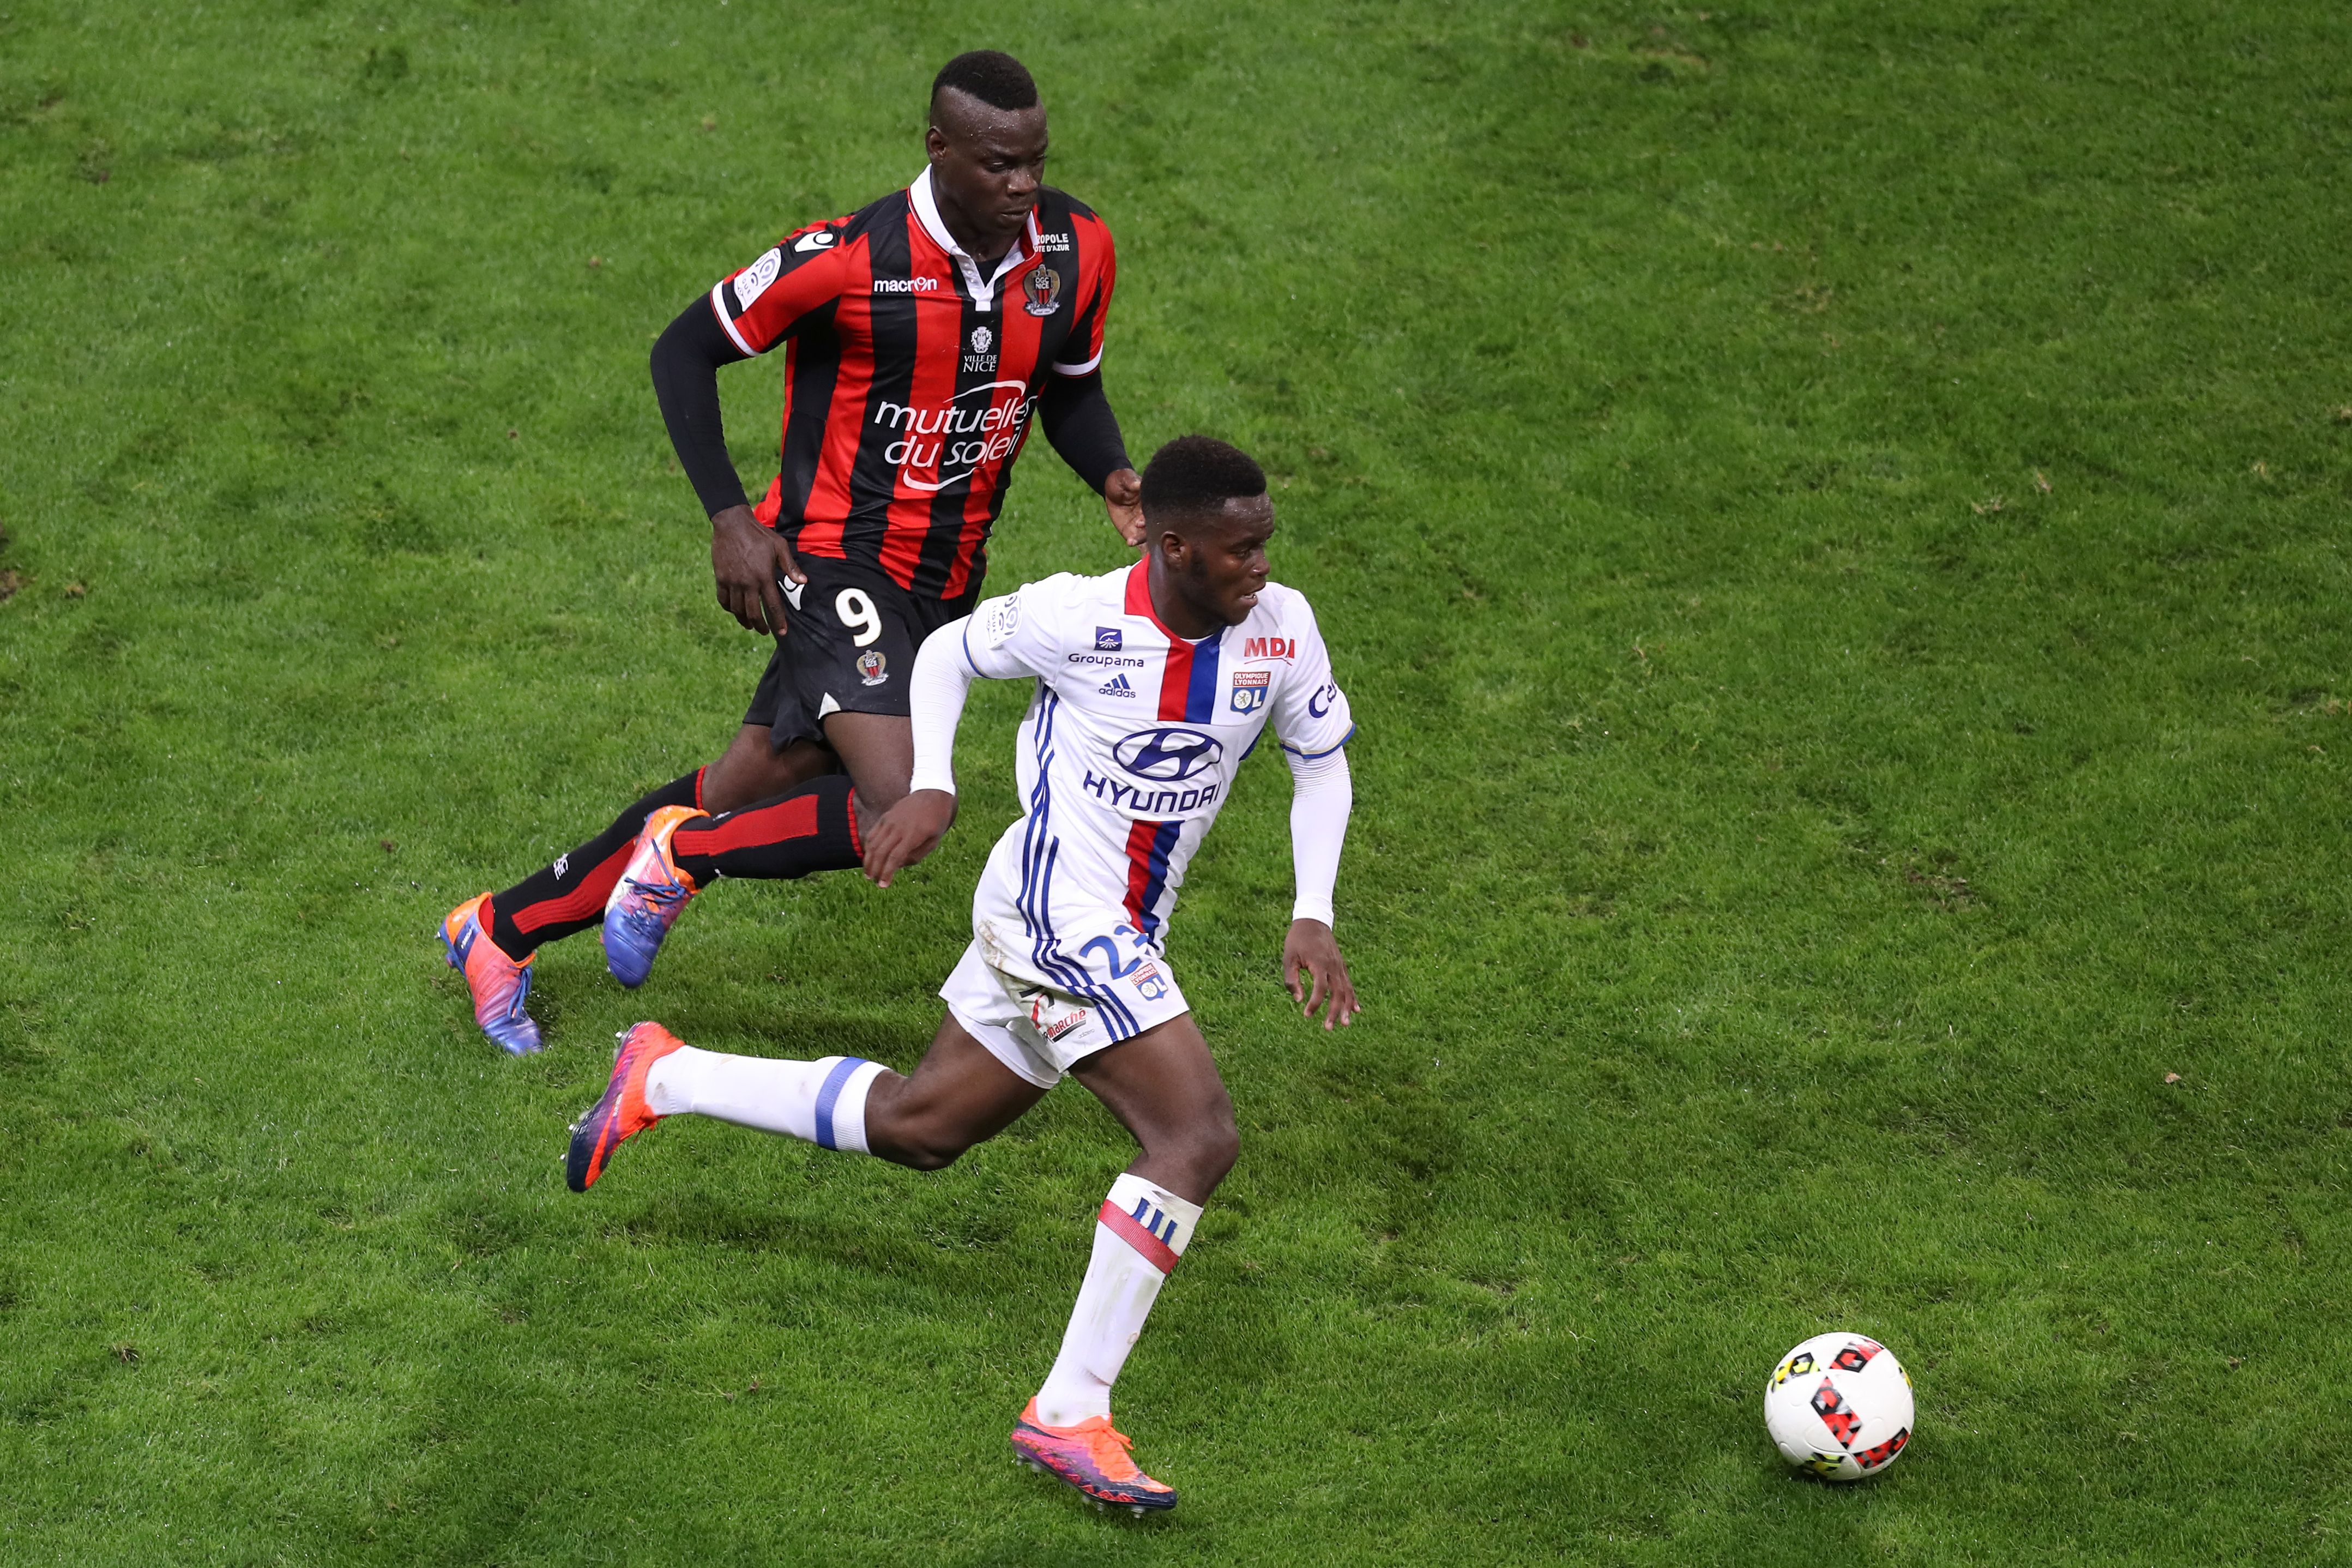 Nice's Italian forward Mario Balotelli (L) vies with Lyon's Jordy Gaspar (R) during the French L1 football match Nice (OGCN) vs Lyon (OL) on October 14, 2016 at the "Allianz Riviera" stadium in Nice, southeastern France.  / AFP / VALERY HACHE        (Photo credit should read VALERY HACHE/AFP/Getty Images)